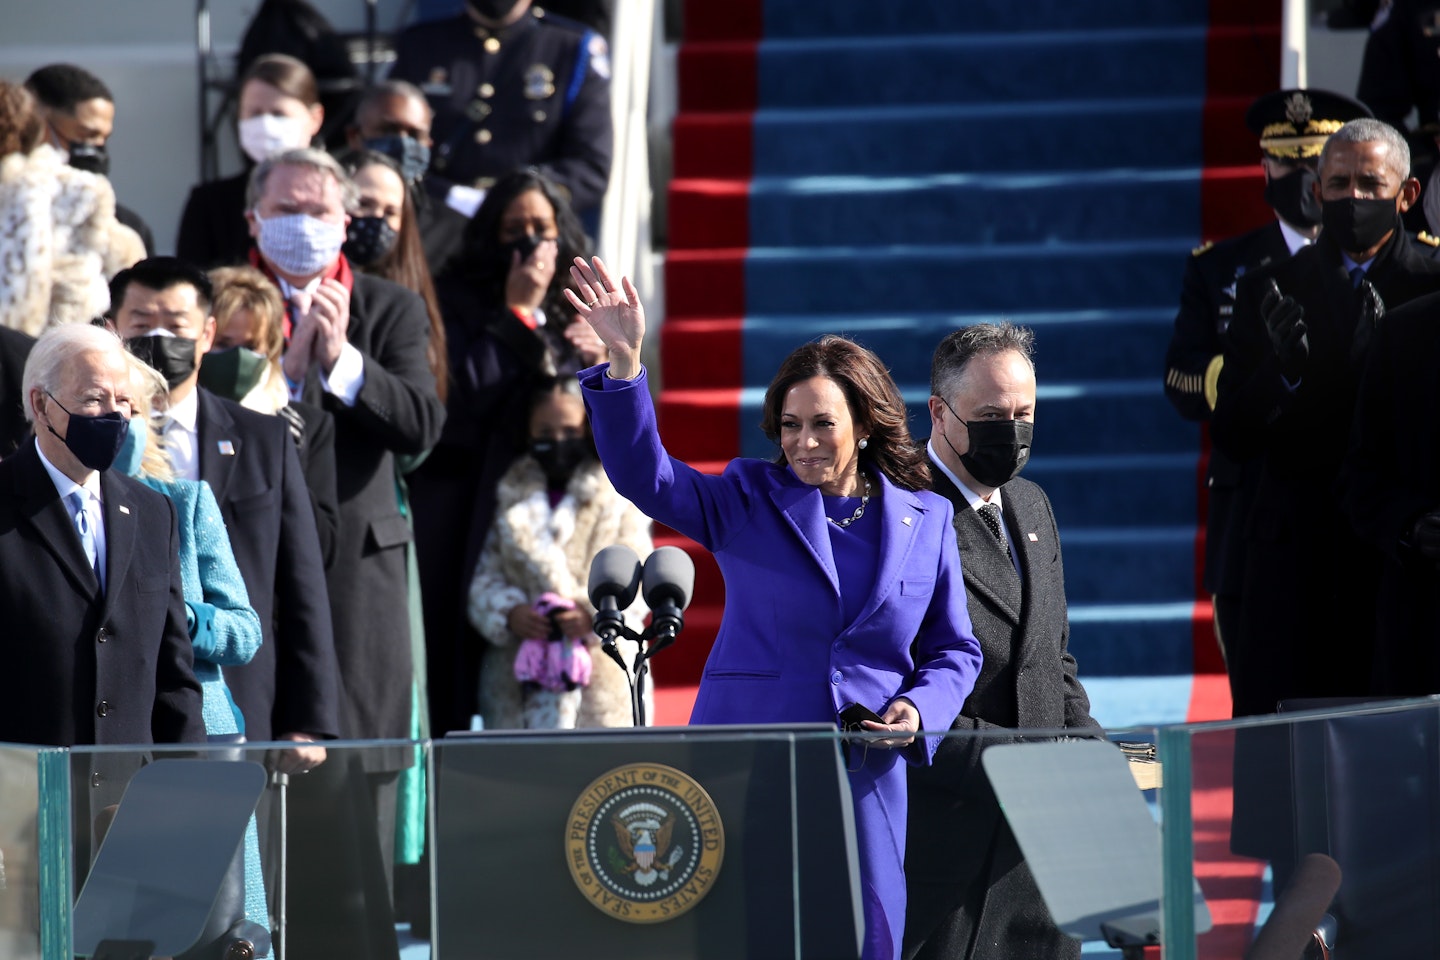 Kamala Harris made history, becoming the first female, Black, and South-Asian vice president